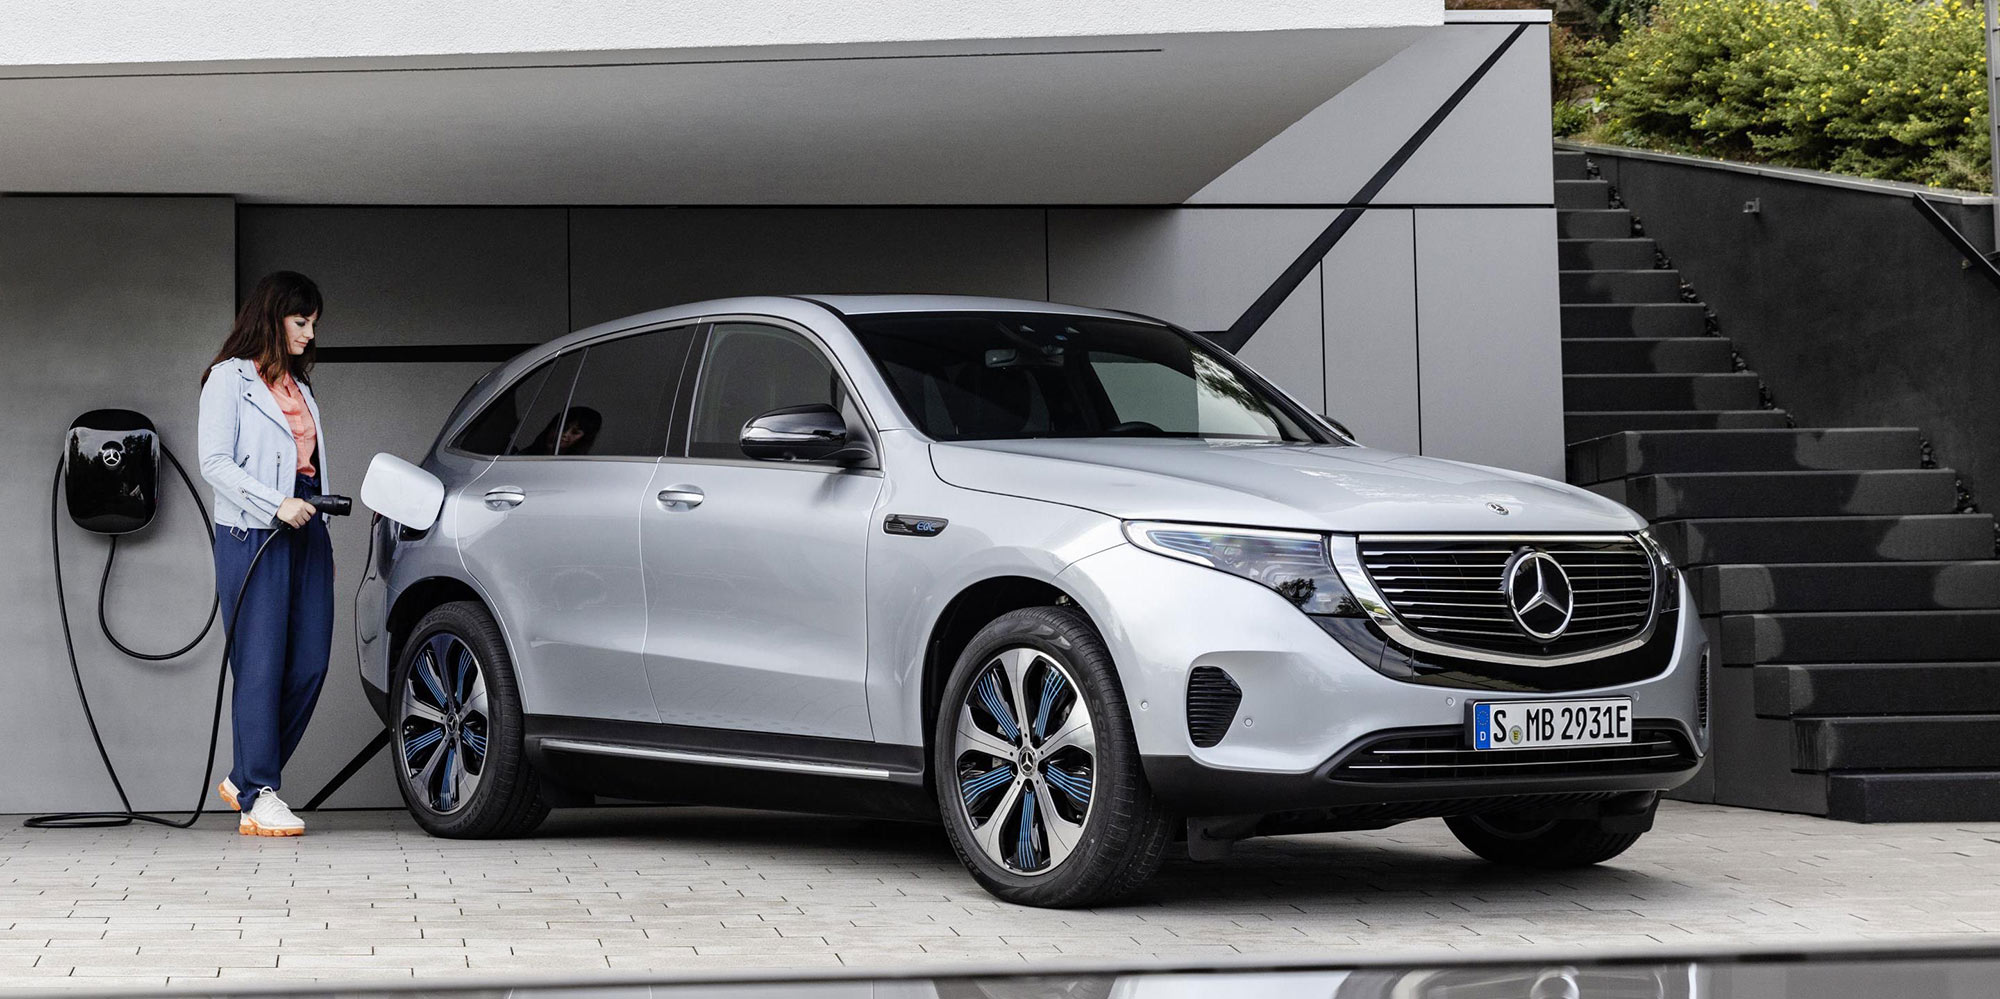 Mercedes Benz Introduces Ev Insurance Coverage To Include Charging Stations Electrek